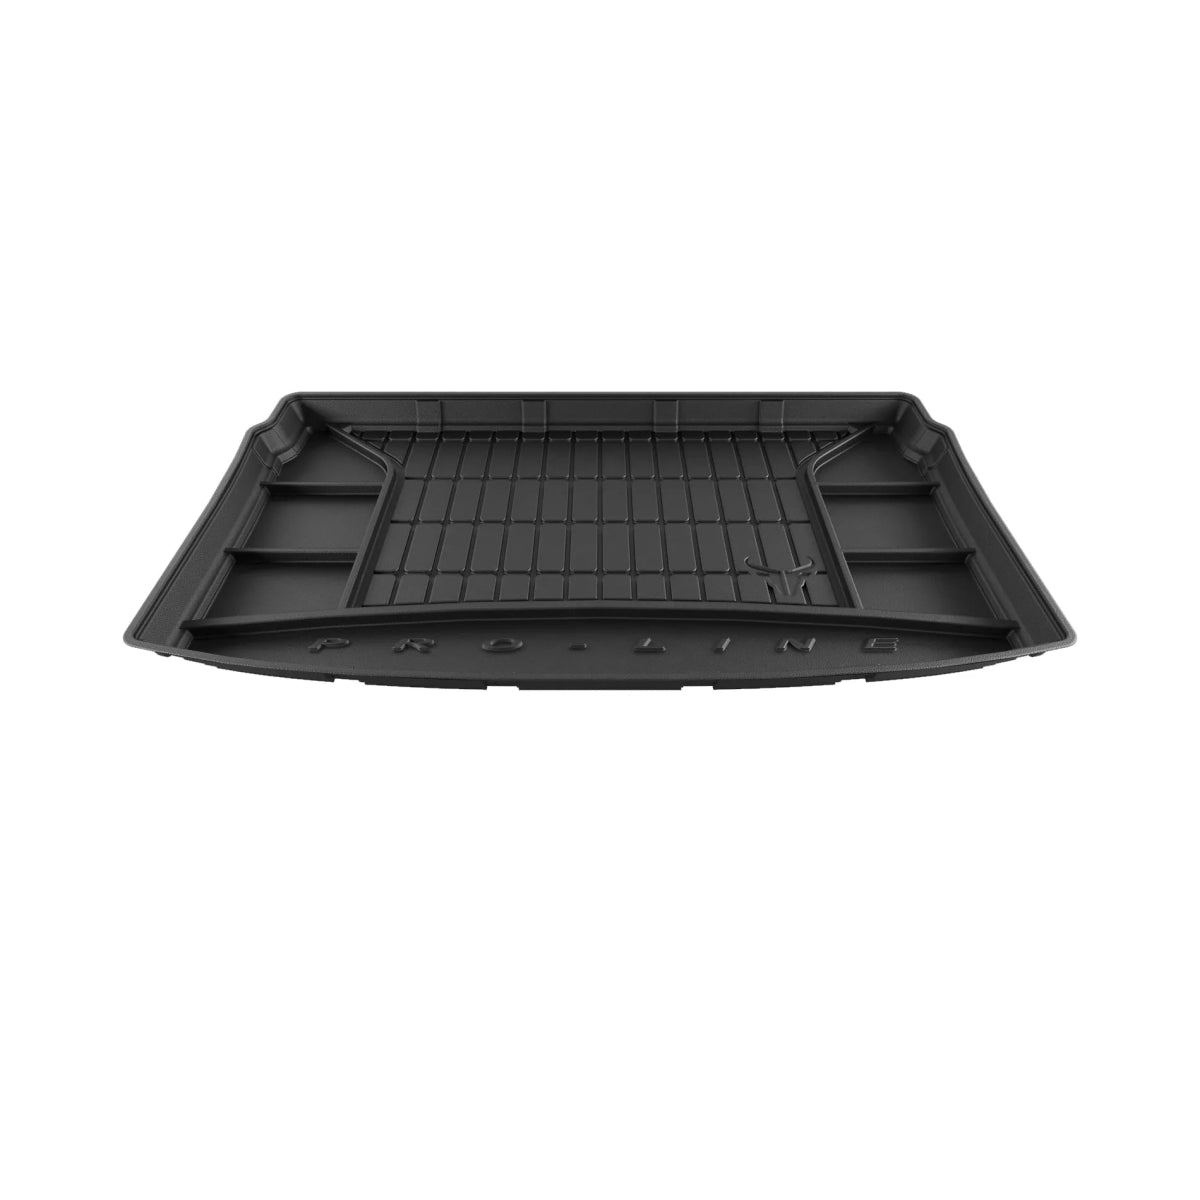 Tailored Car Boot Liner for VW - Protect Your Boot from Dirt and Damage - Green Flag Shop